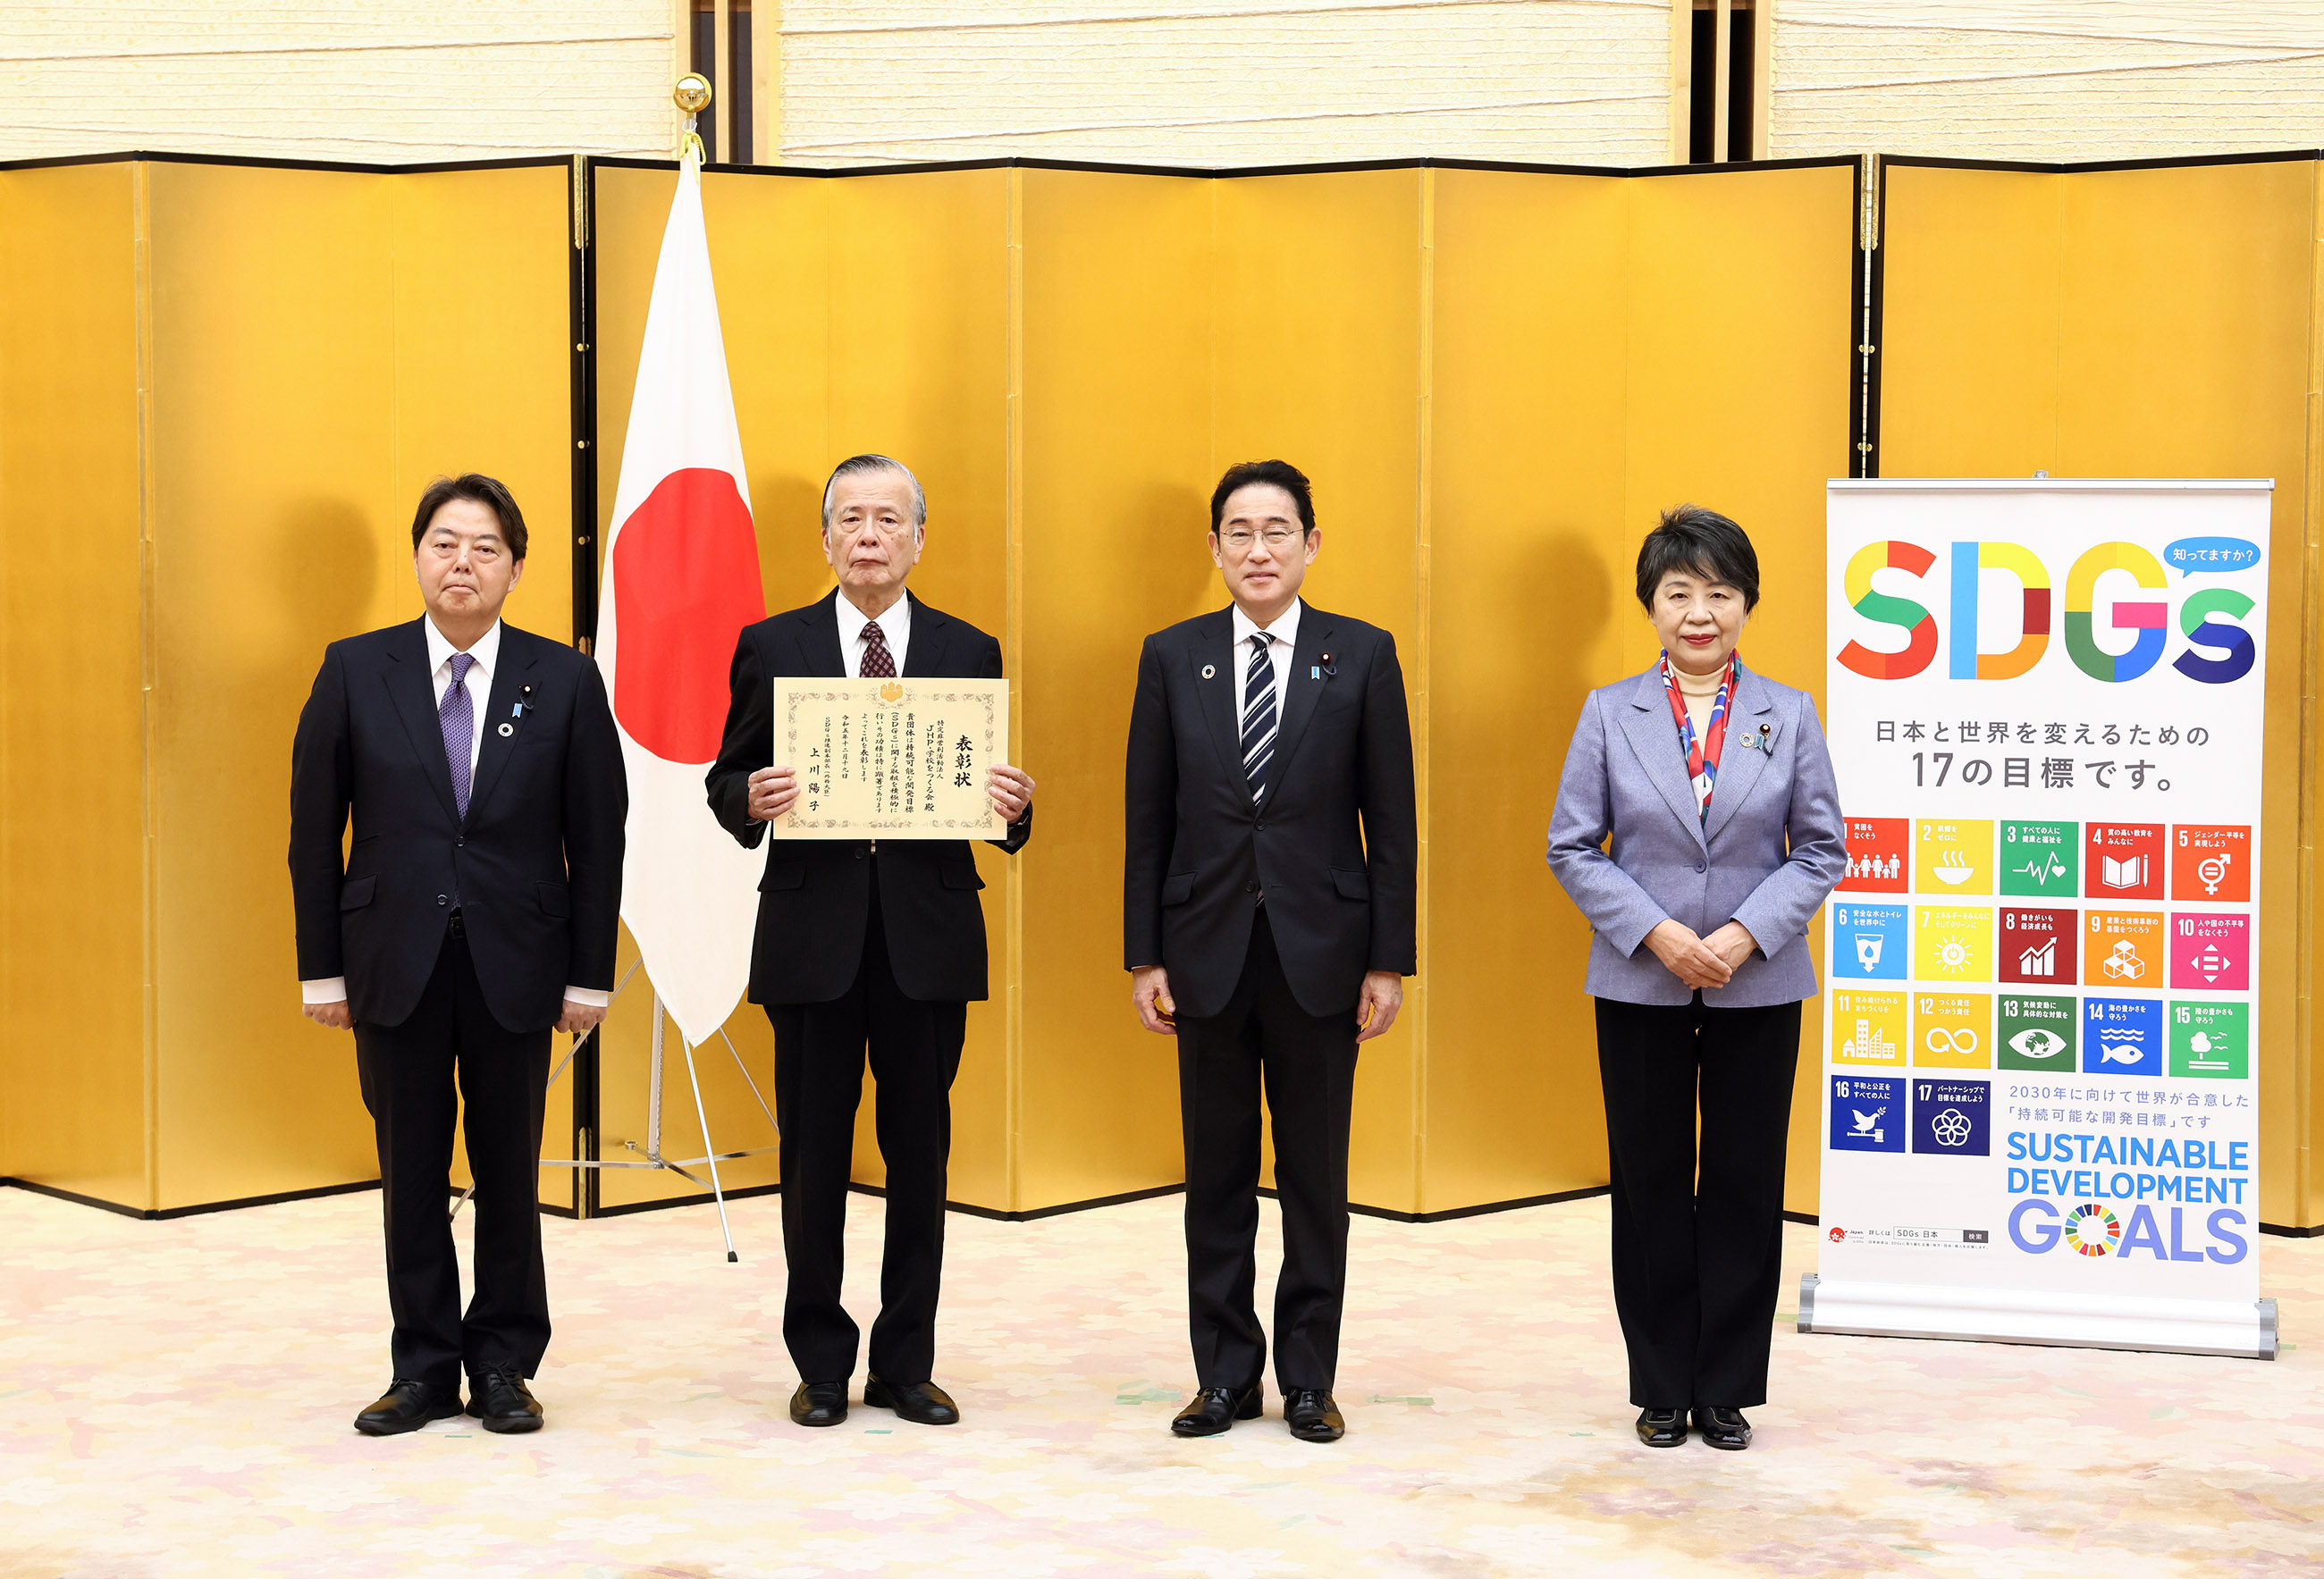 Commemorative photo session with the recipients (3)